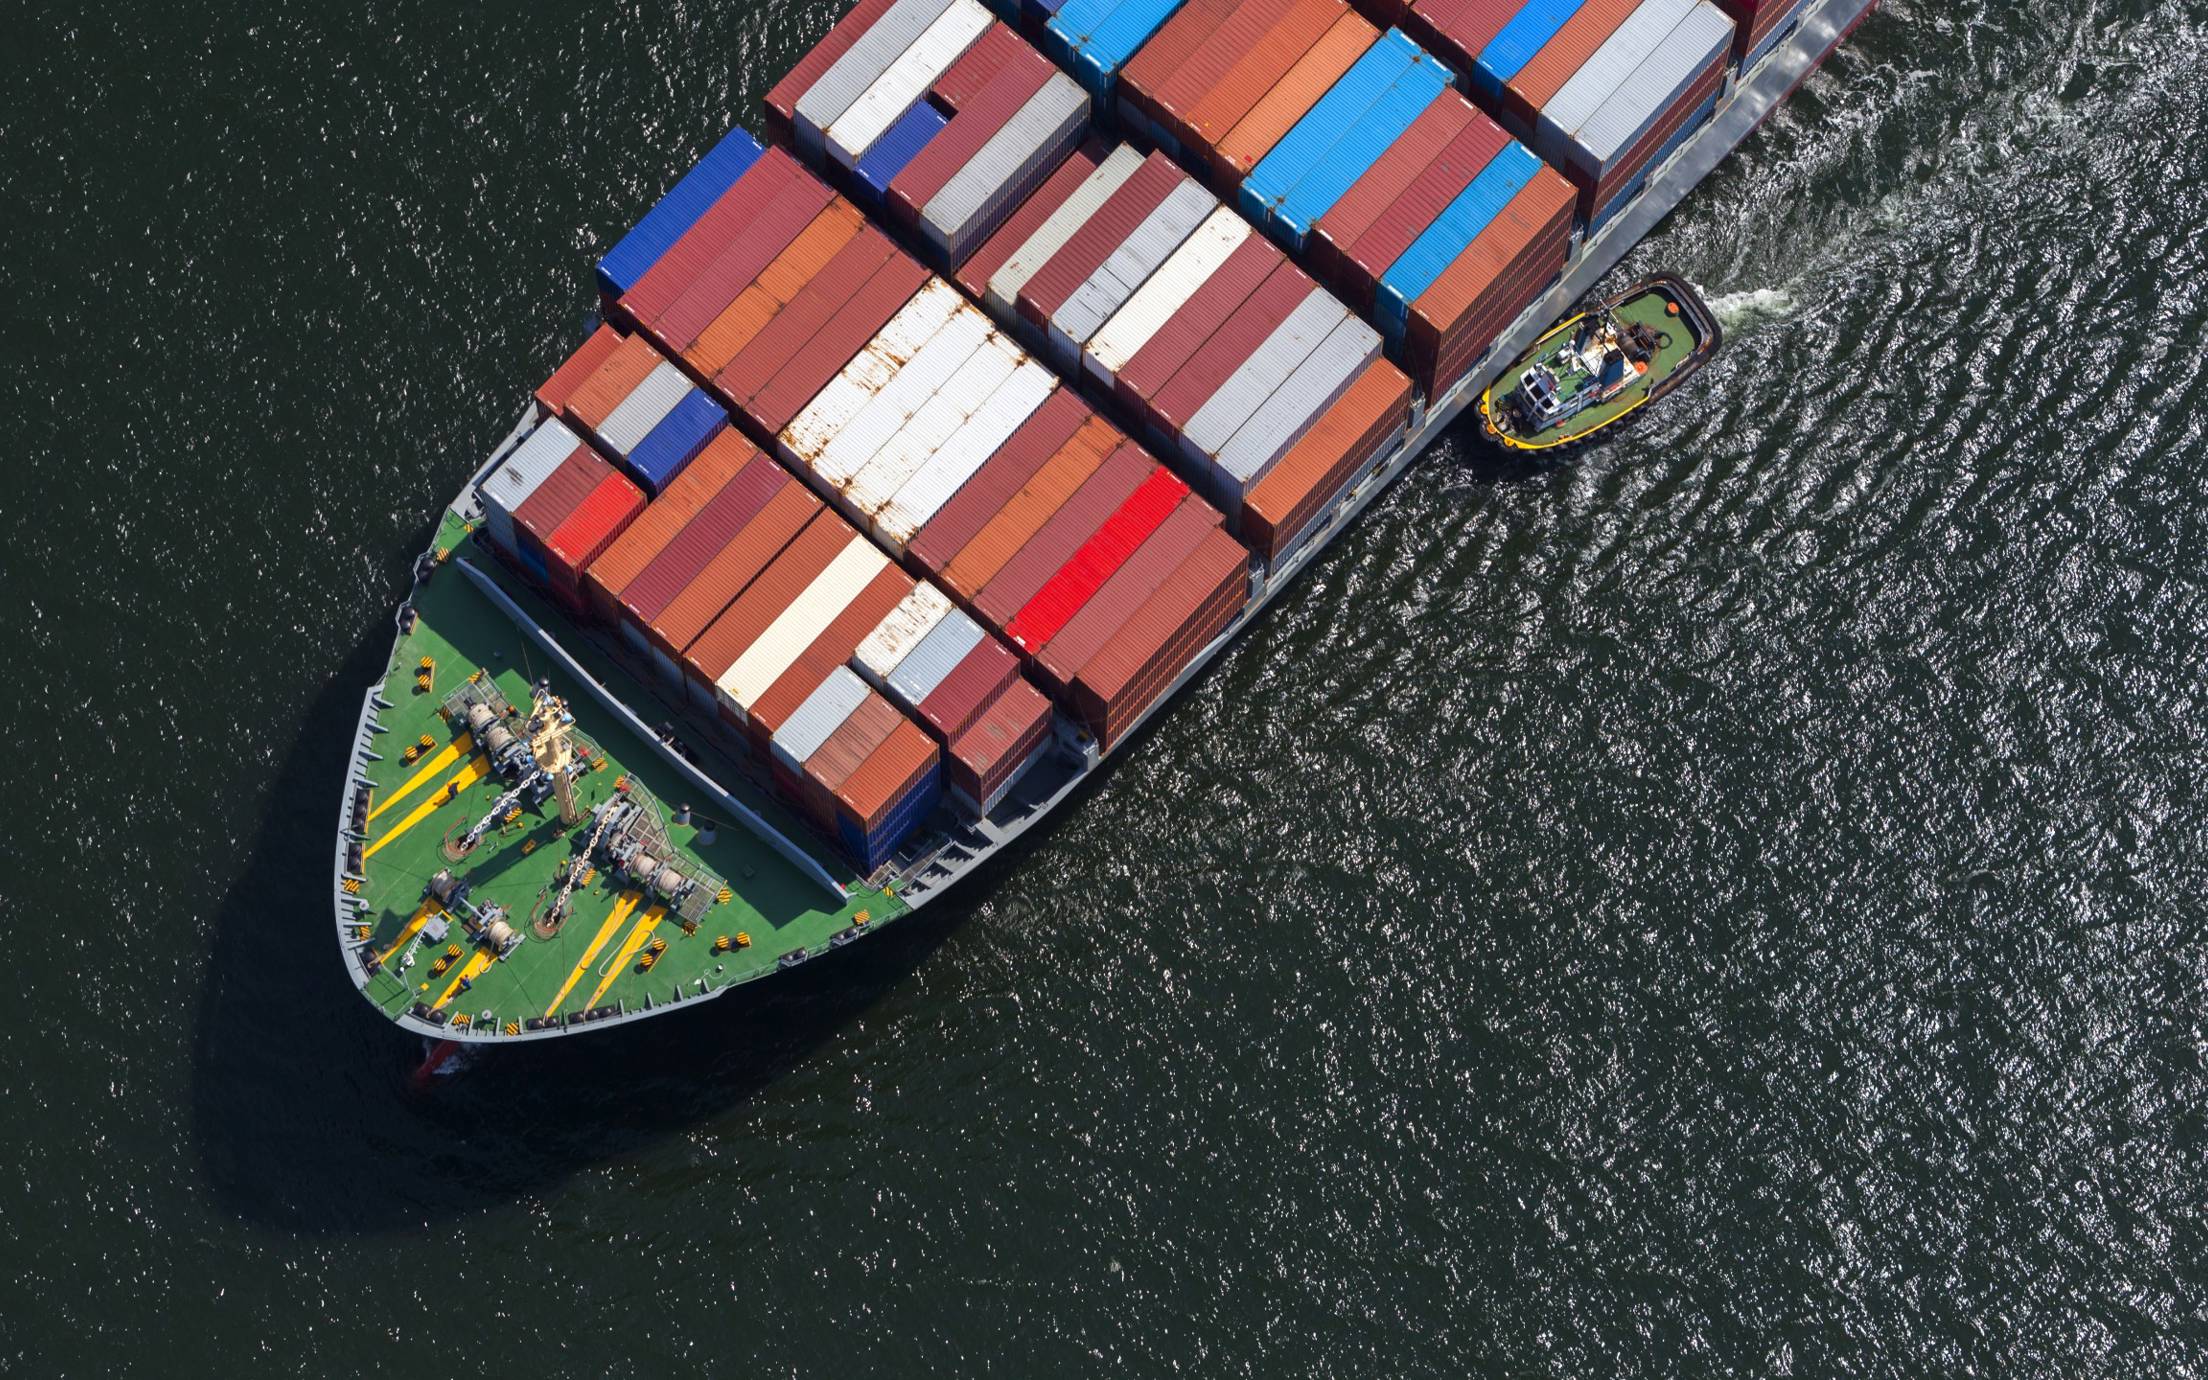 Cargo ship seen from above